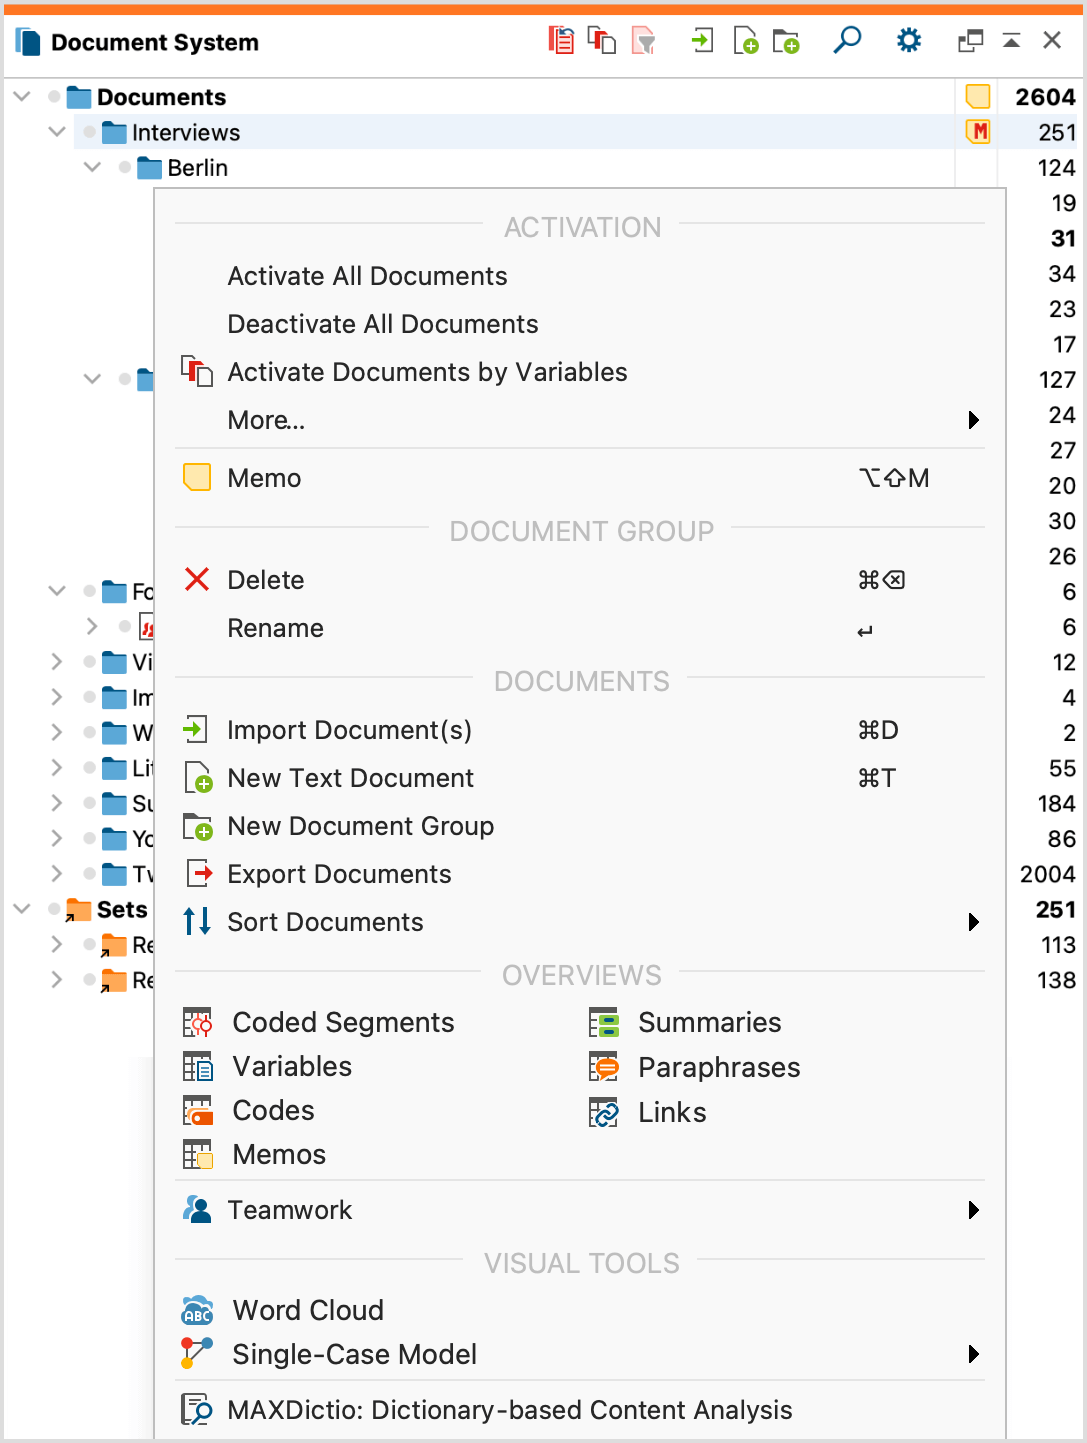 Context menu for the middle (document group) level in the Document System